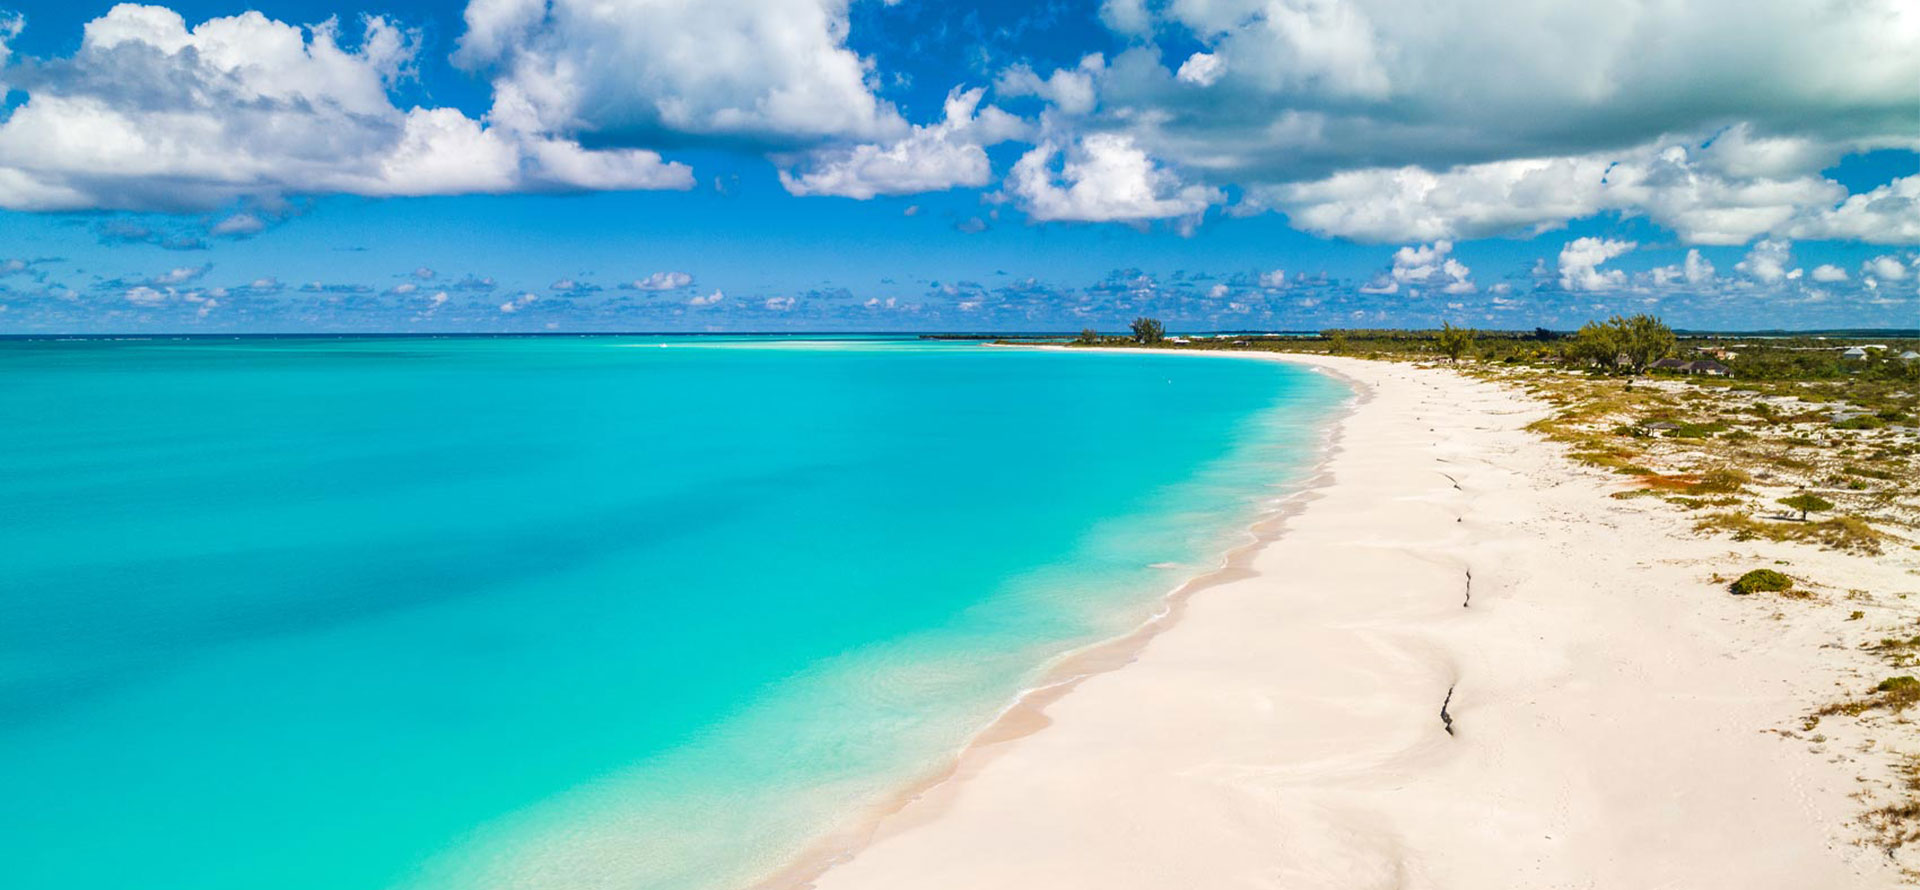 Turks and caicos beautiful water at best month to visit.